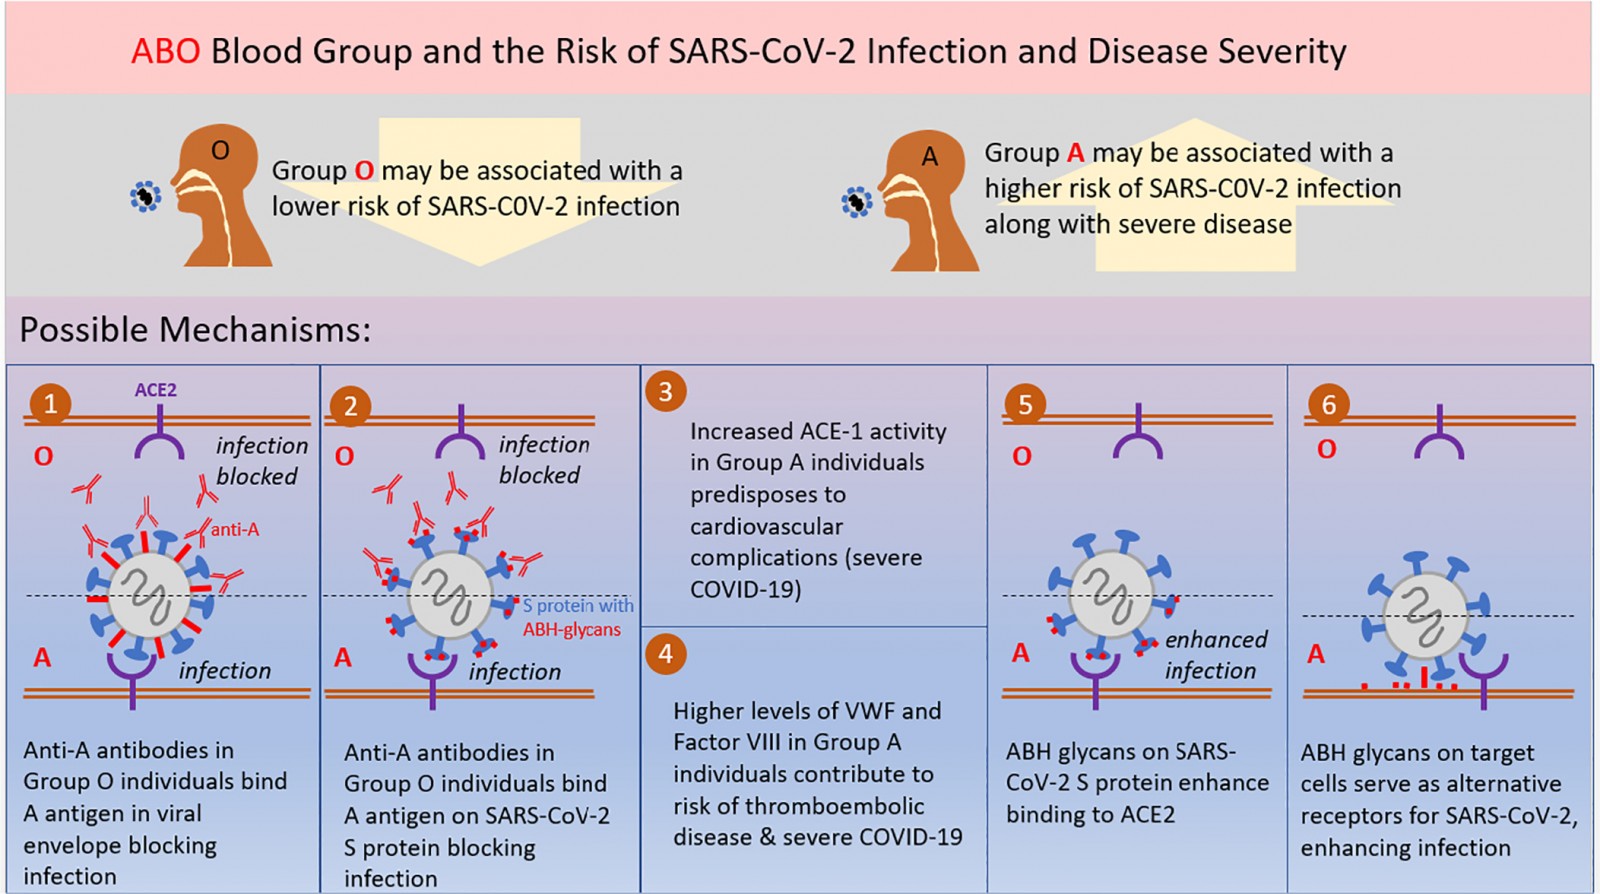 Proposed mechanisms for association between ABO blood type and SARS‐CoV‐2 infection